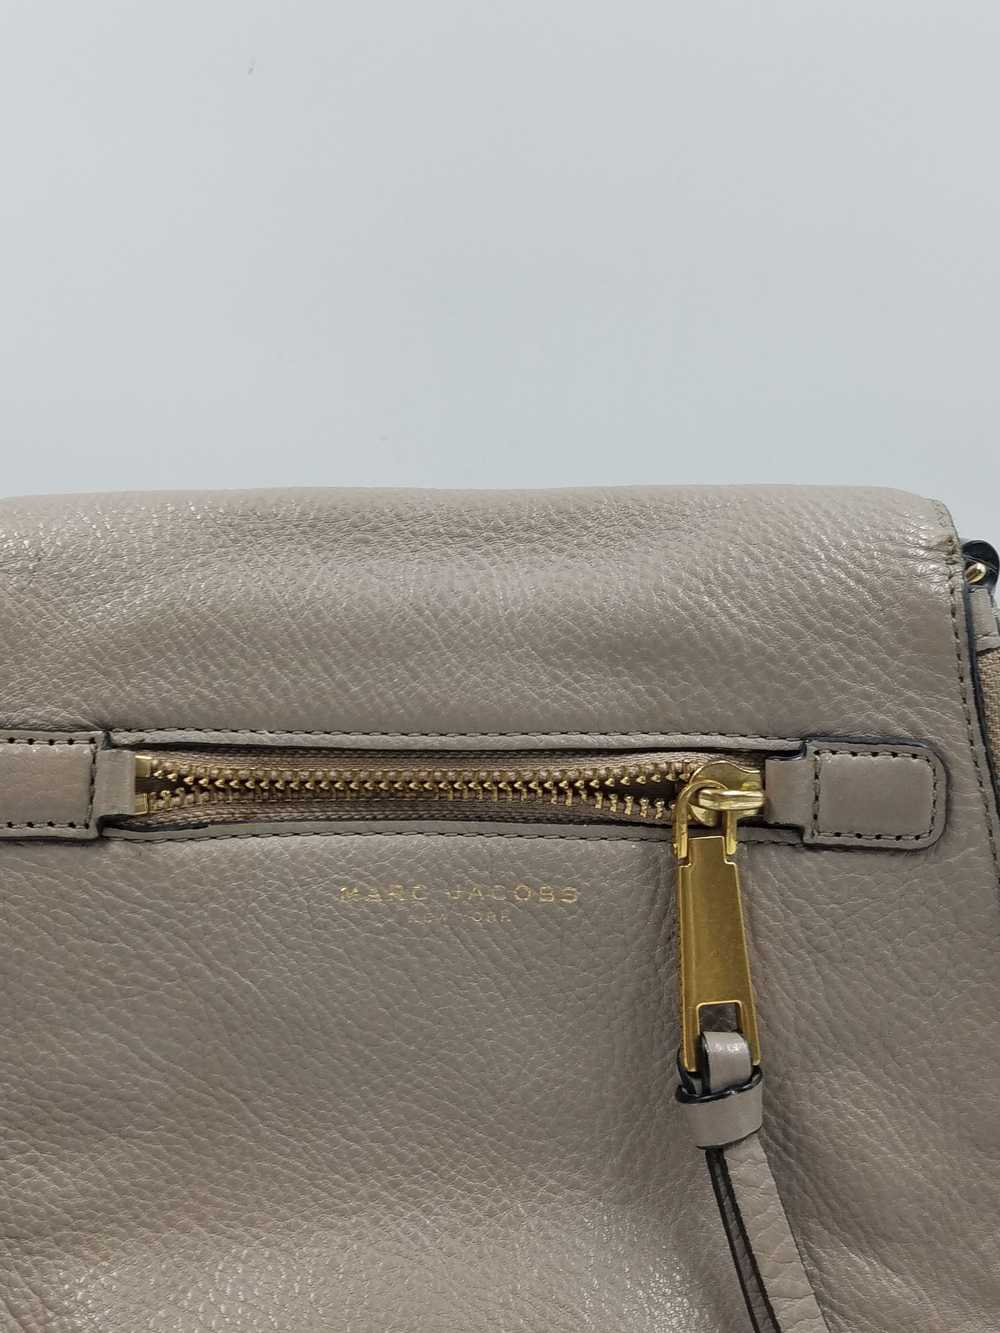 Authentic Marc Jacobs Taupe Saddle Bag - image 7